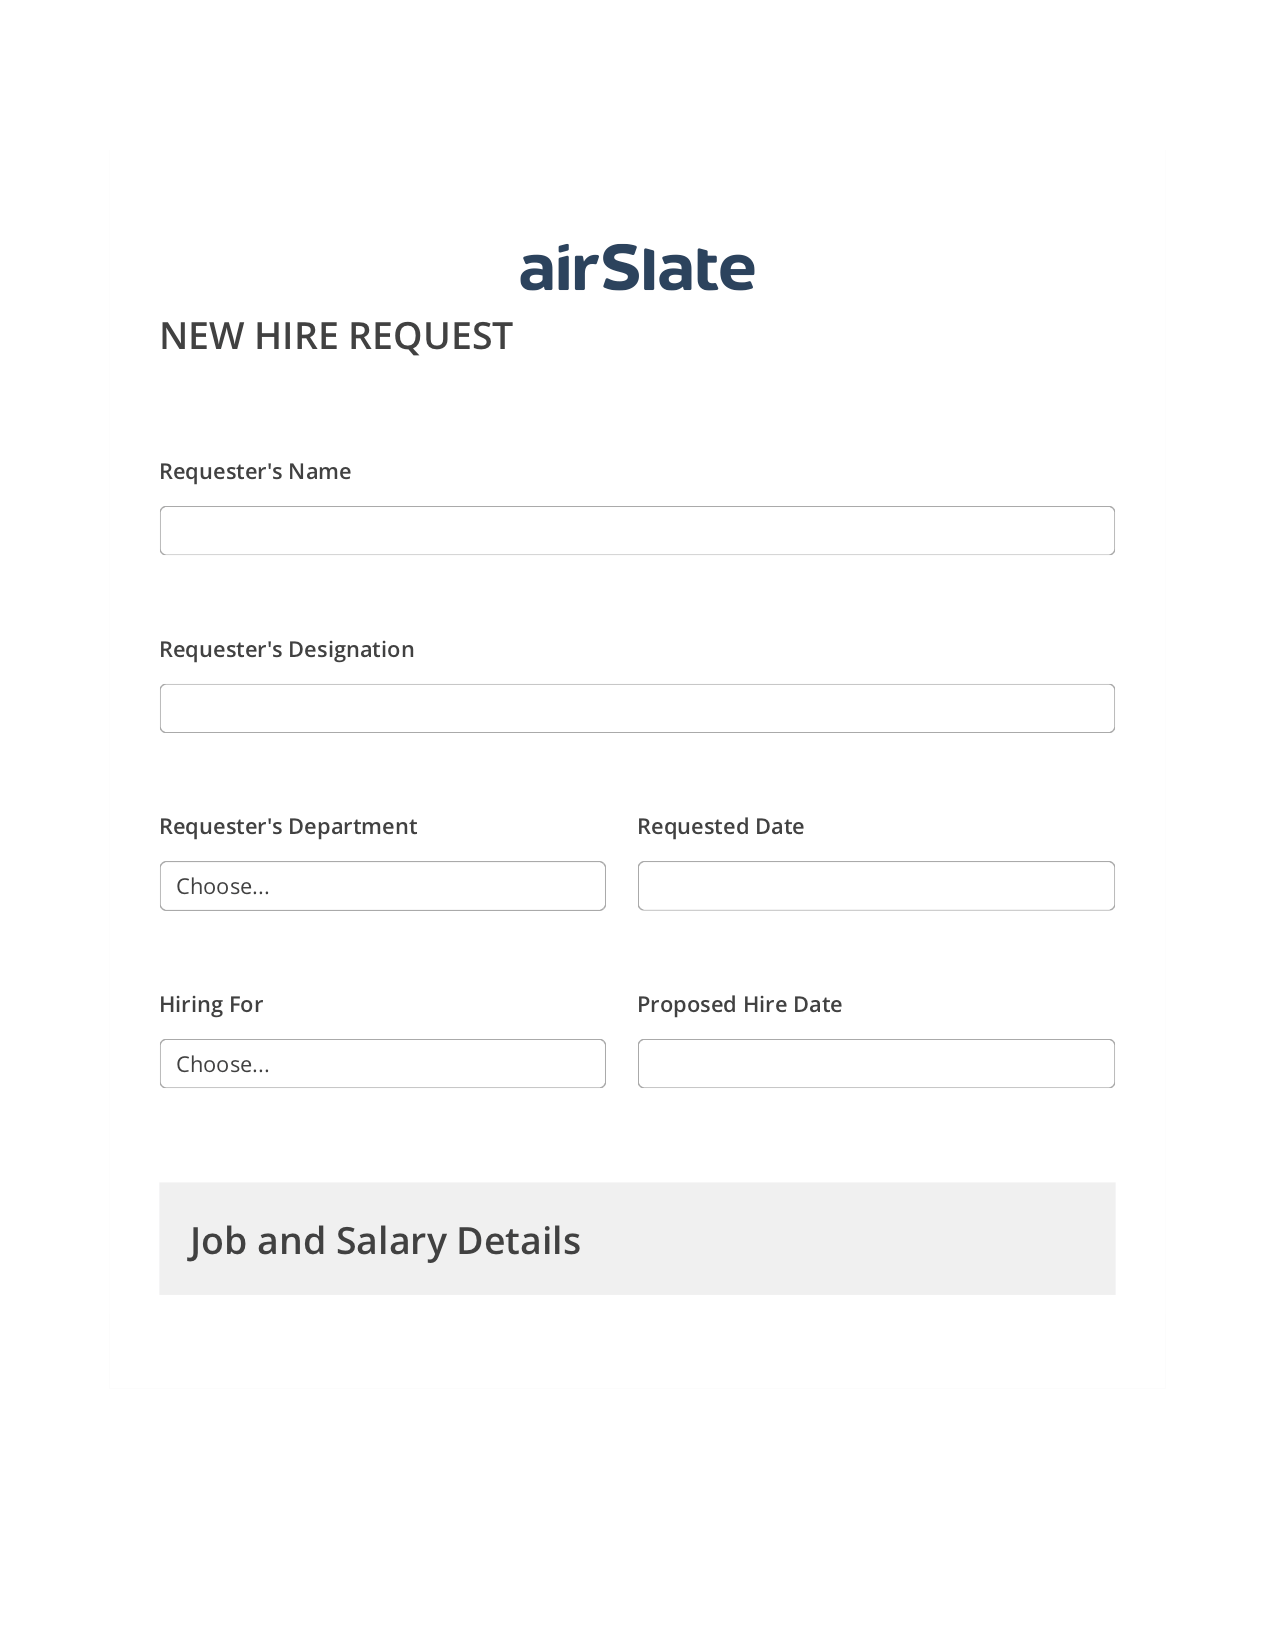 Hiring Request Workflow Pre-fill Dropdowns from MySQL Bot, Hide Signatures Bot, Archive to Box Bot